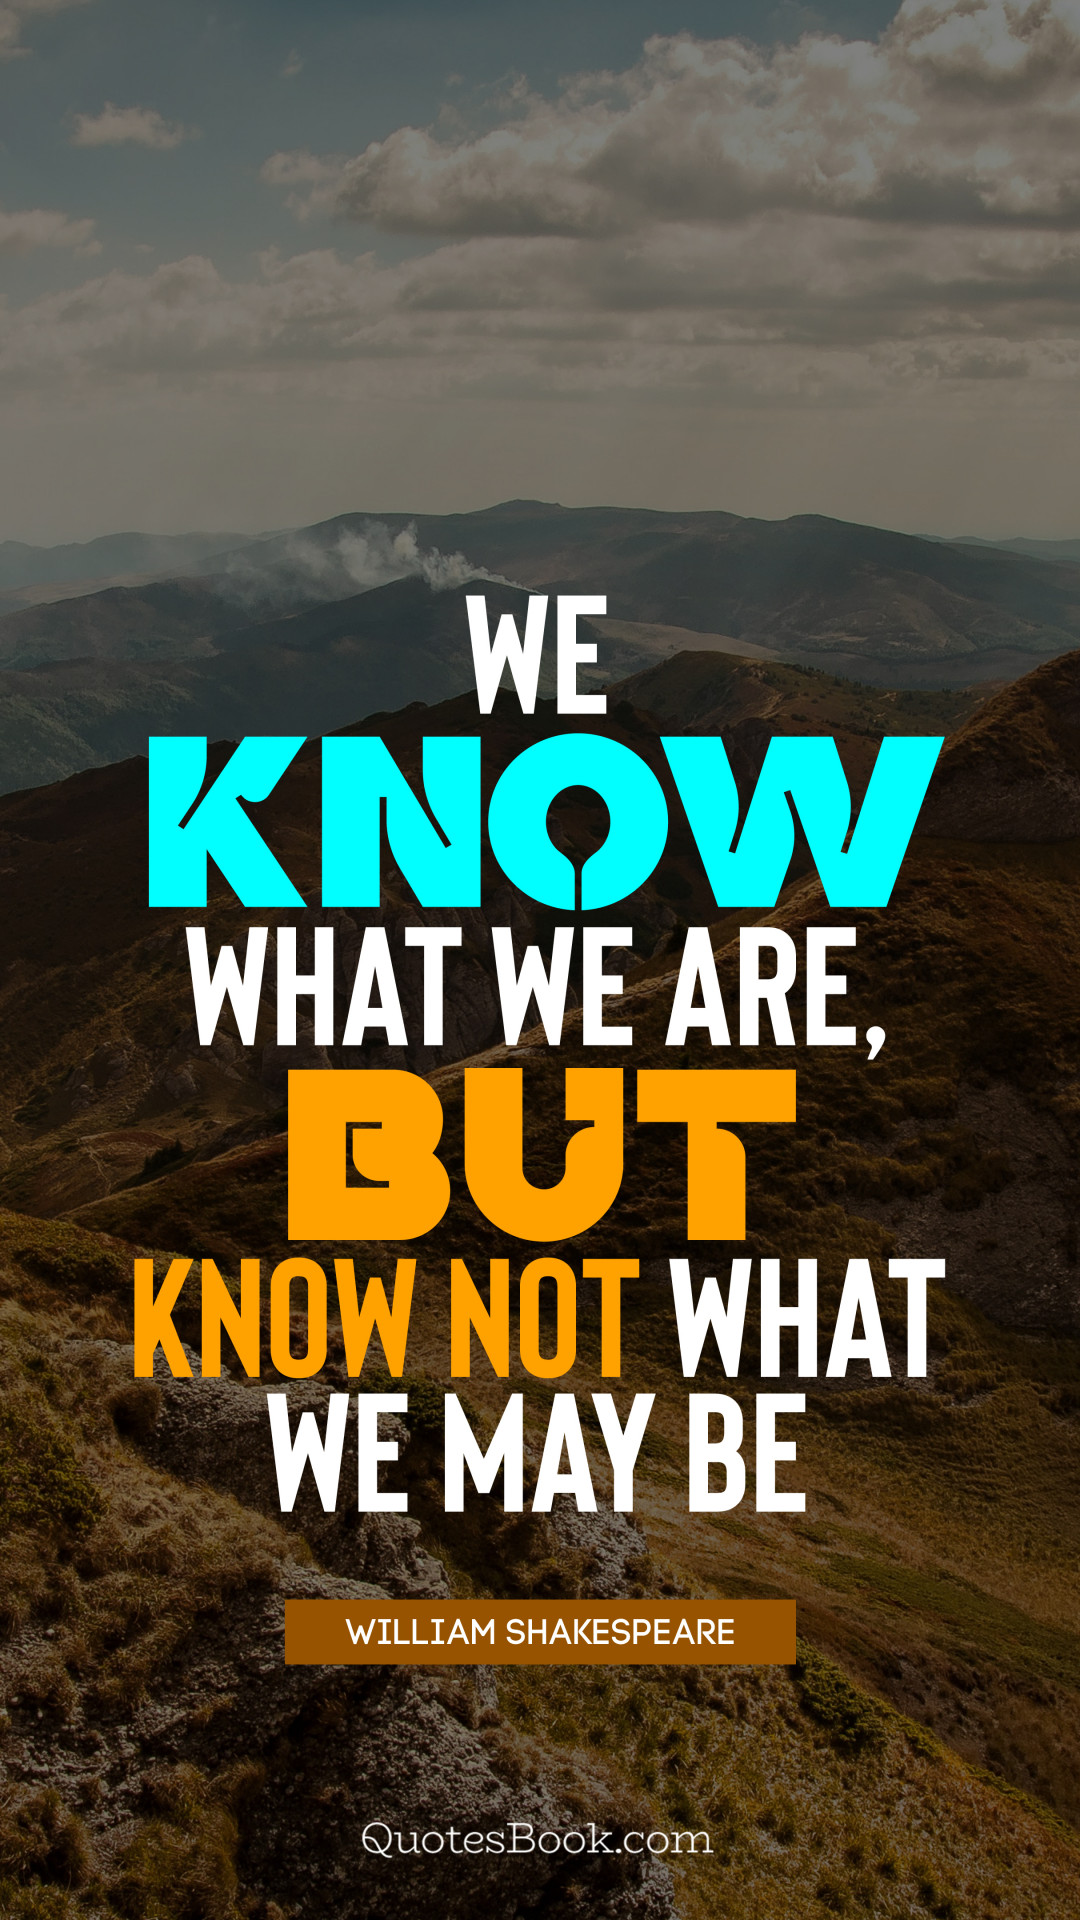 We know what we are, but know not what we may be. Quote